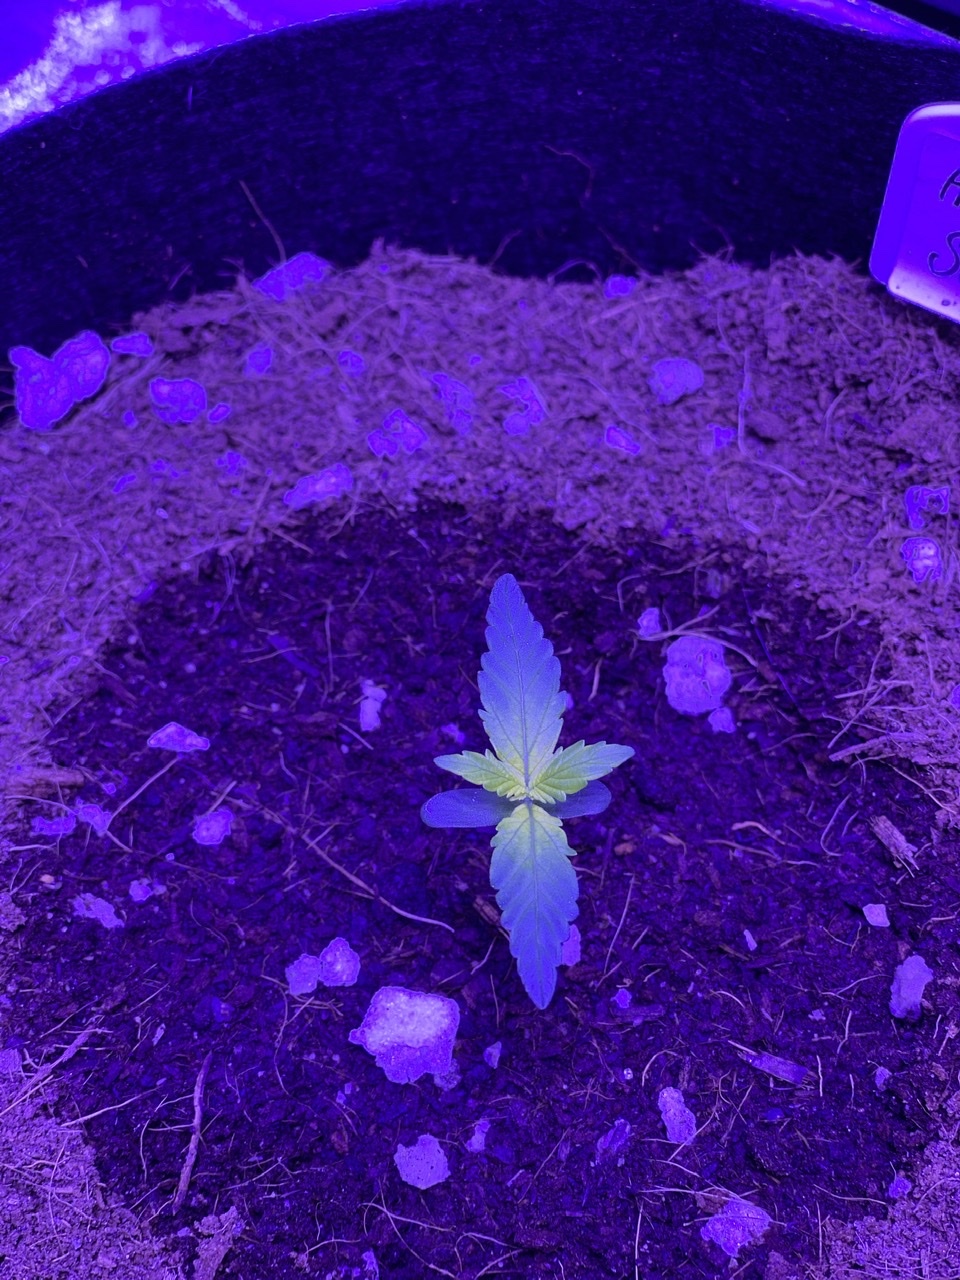 Help need assistance with identifying seedling problem new grower 6